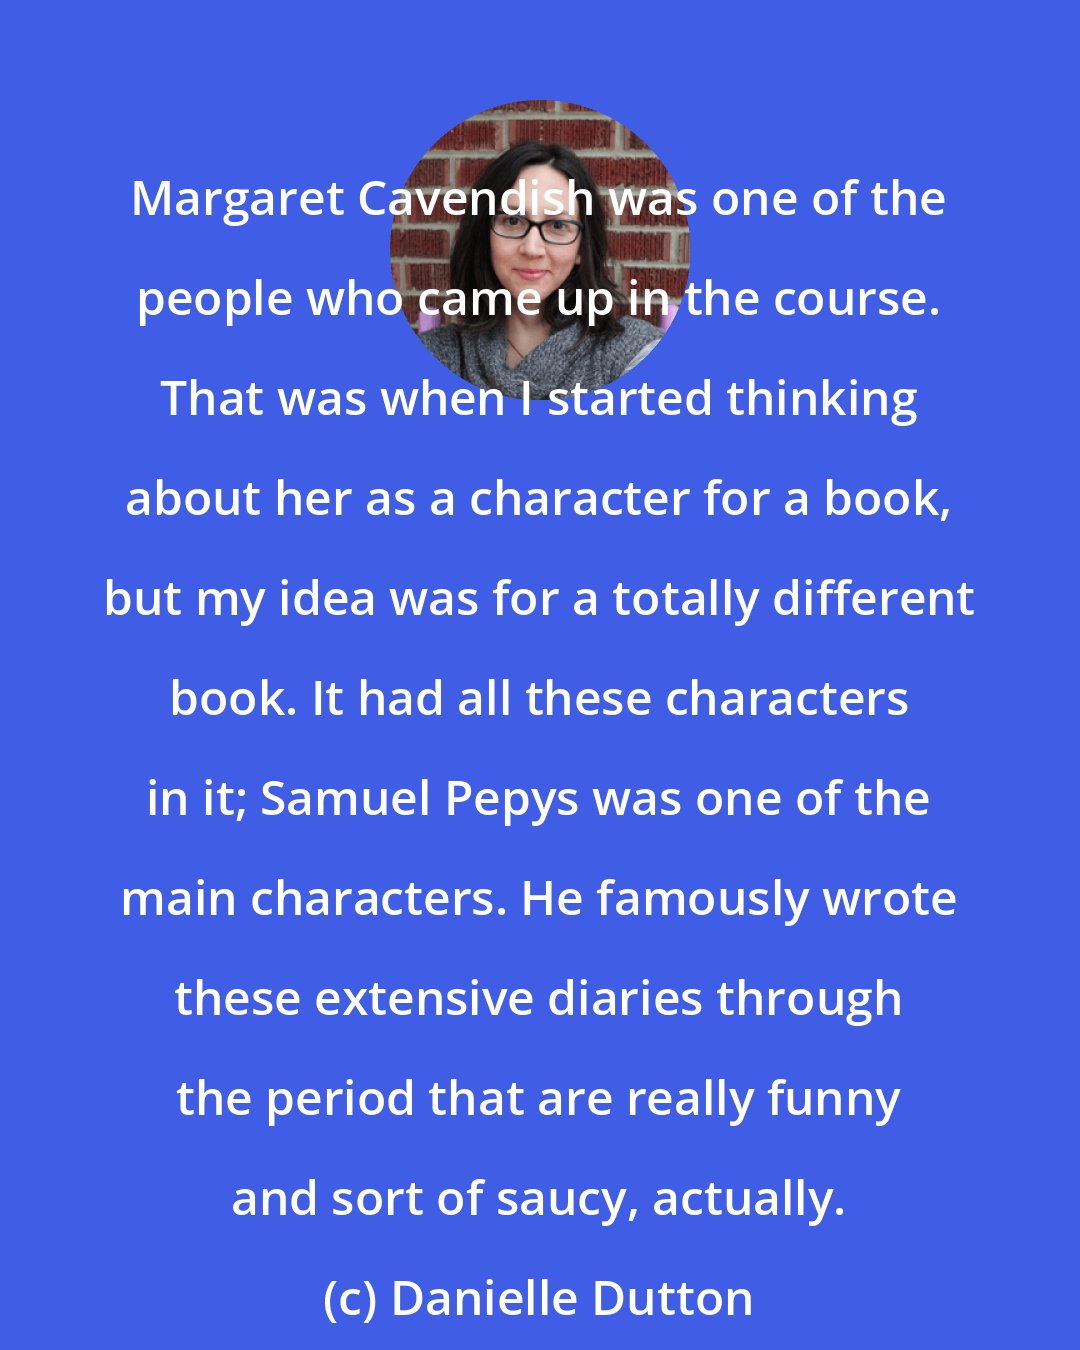 Danielle Dutton: Margaret Cavendish was one of the people who came up in the course. That was when I started thinking about her as a character for a book, but my idea was for a totally different book. It had all these characters in it; Samuel Pepys was one of the main characters. He famously wrote these extensive diaries through the period that are really funny and sort of saucy, actually.